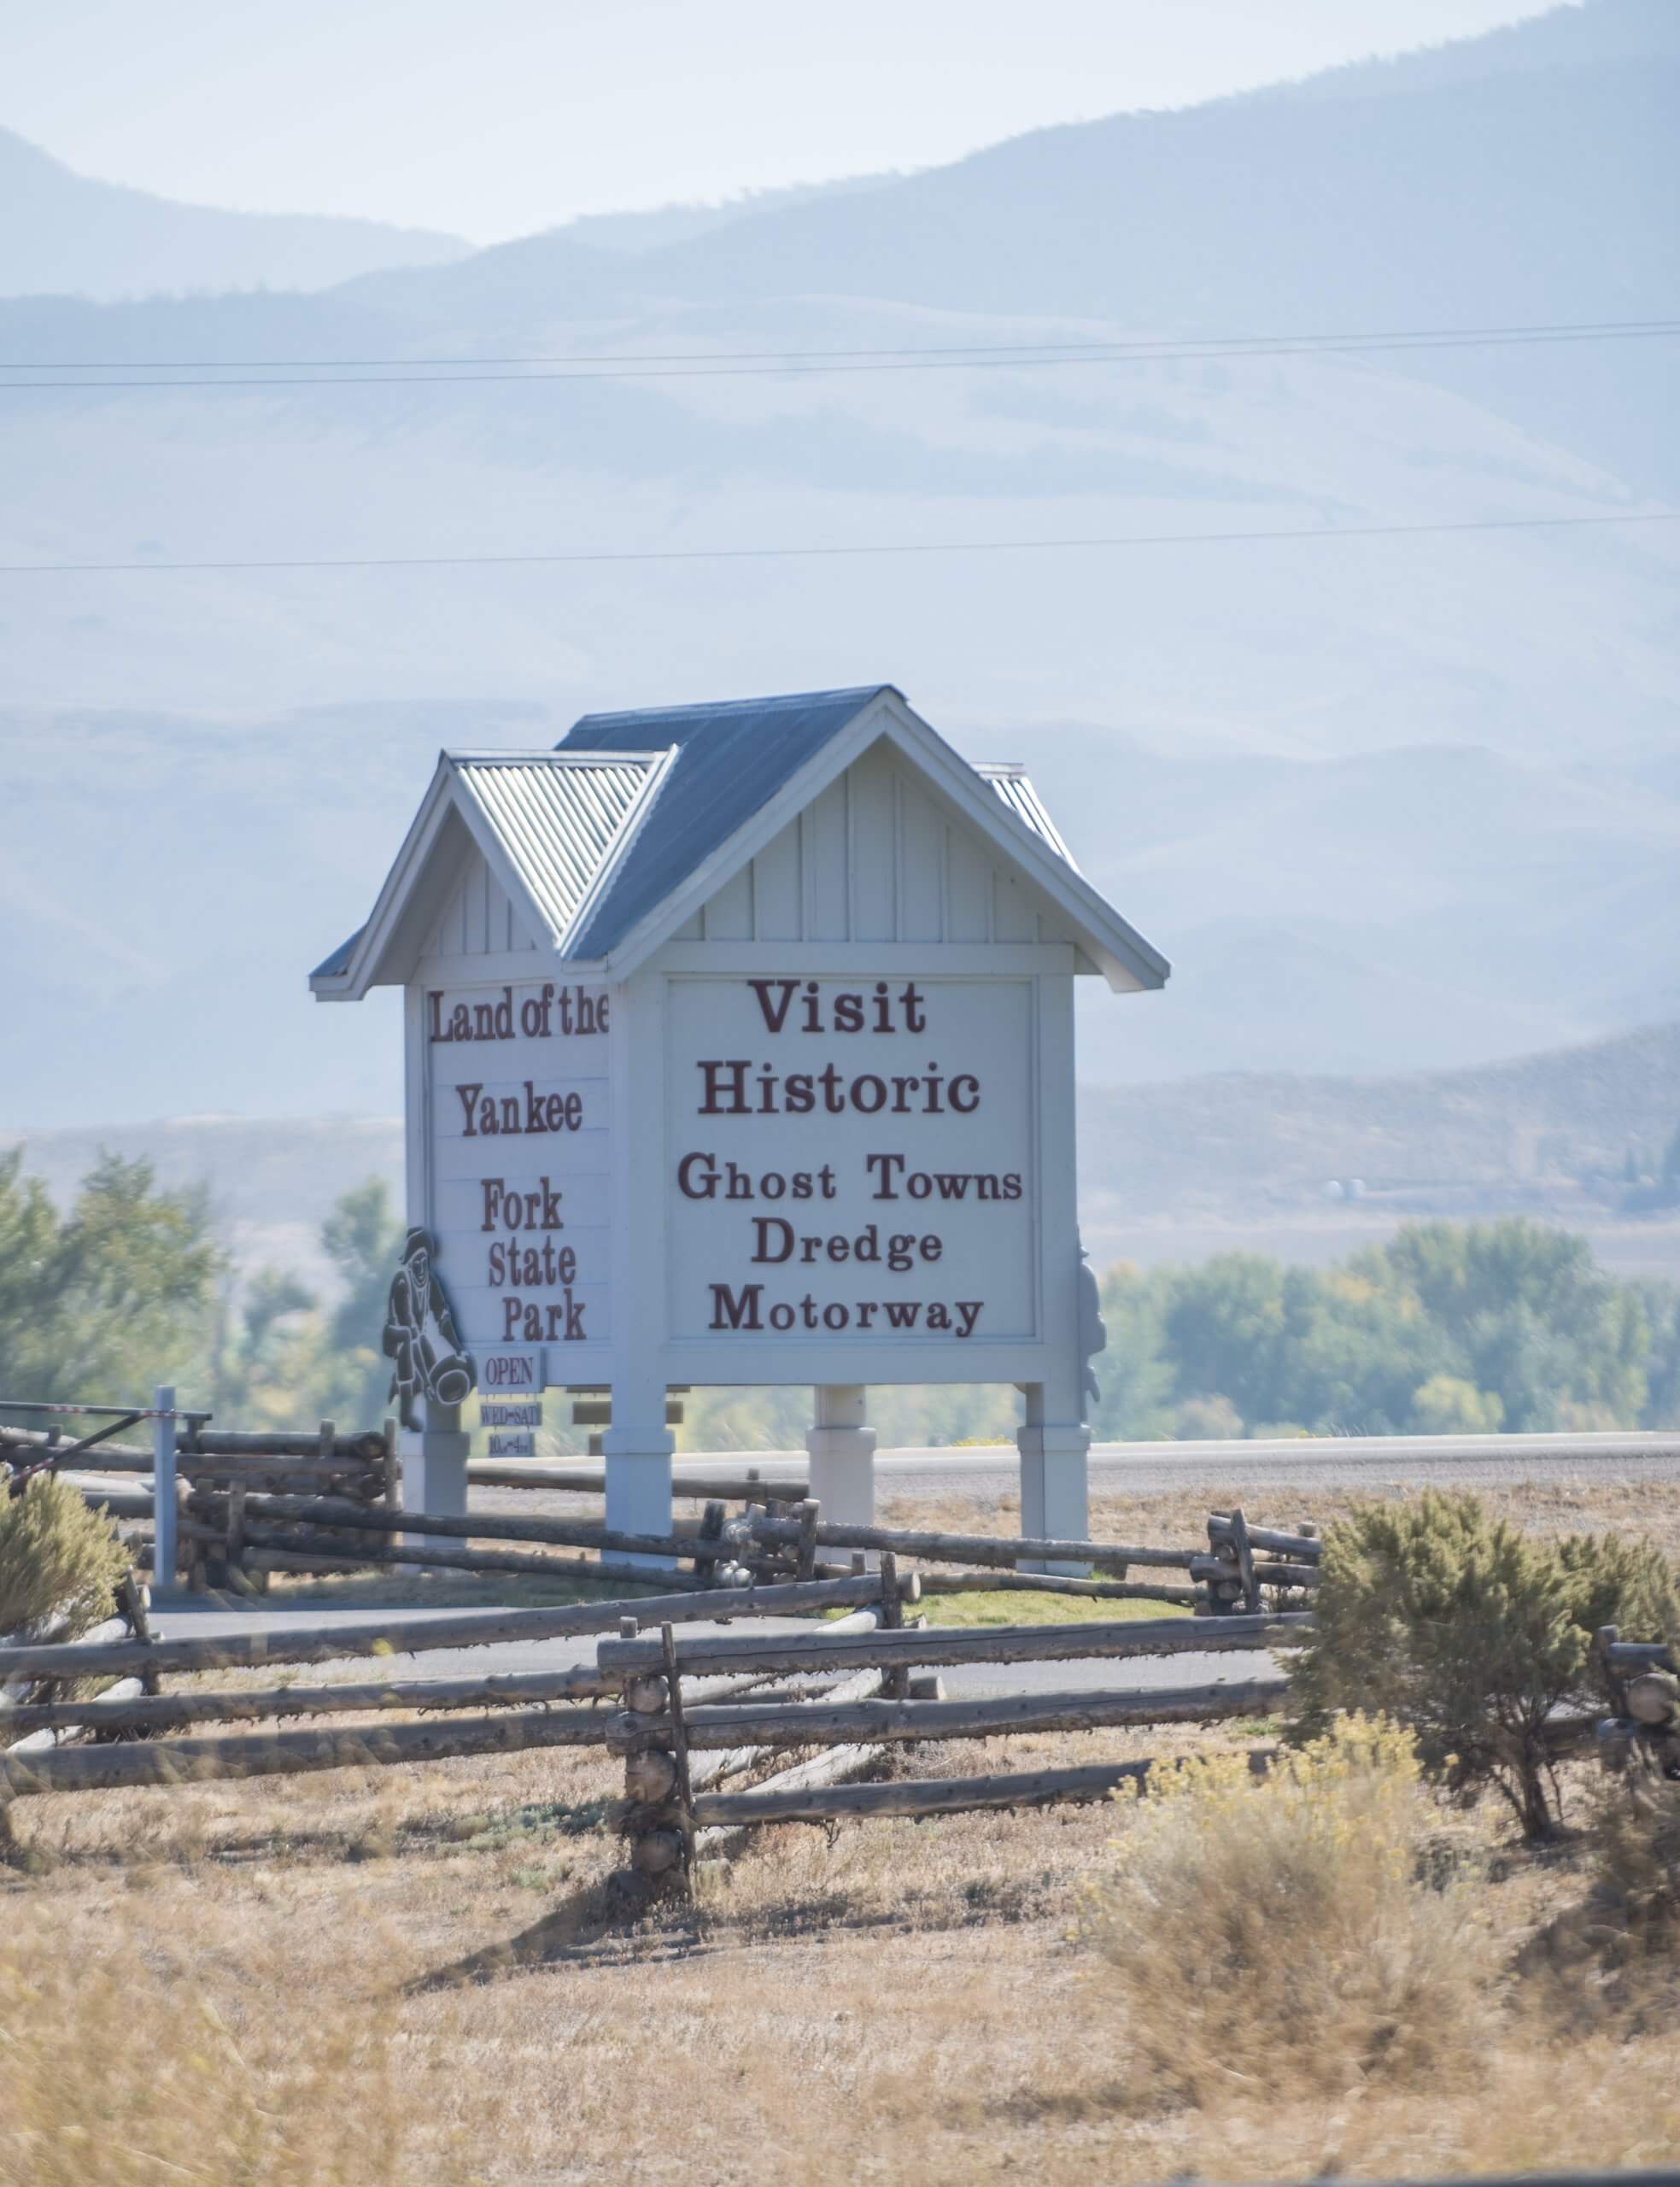 A white, wooden, house-shaped sign that reads "Land of the Yankee Fork State Park" on one side and "Visit Historic Ghost Towns Dredge Motorway" on the other.